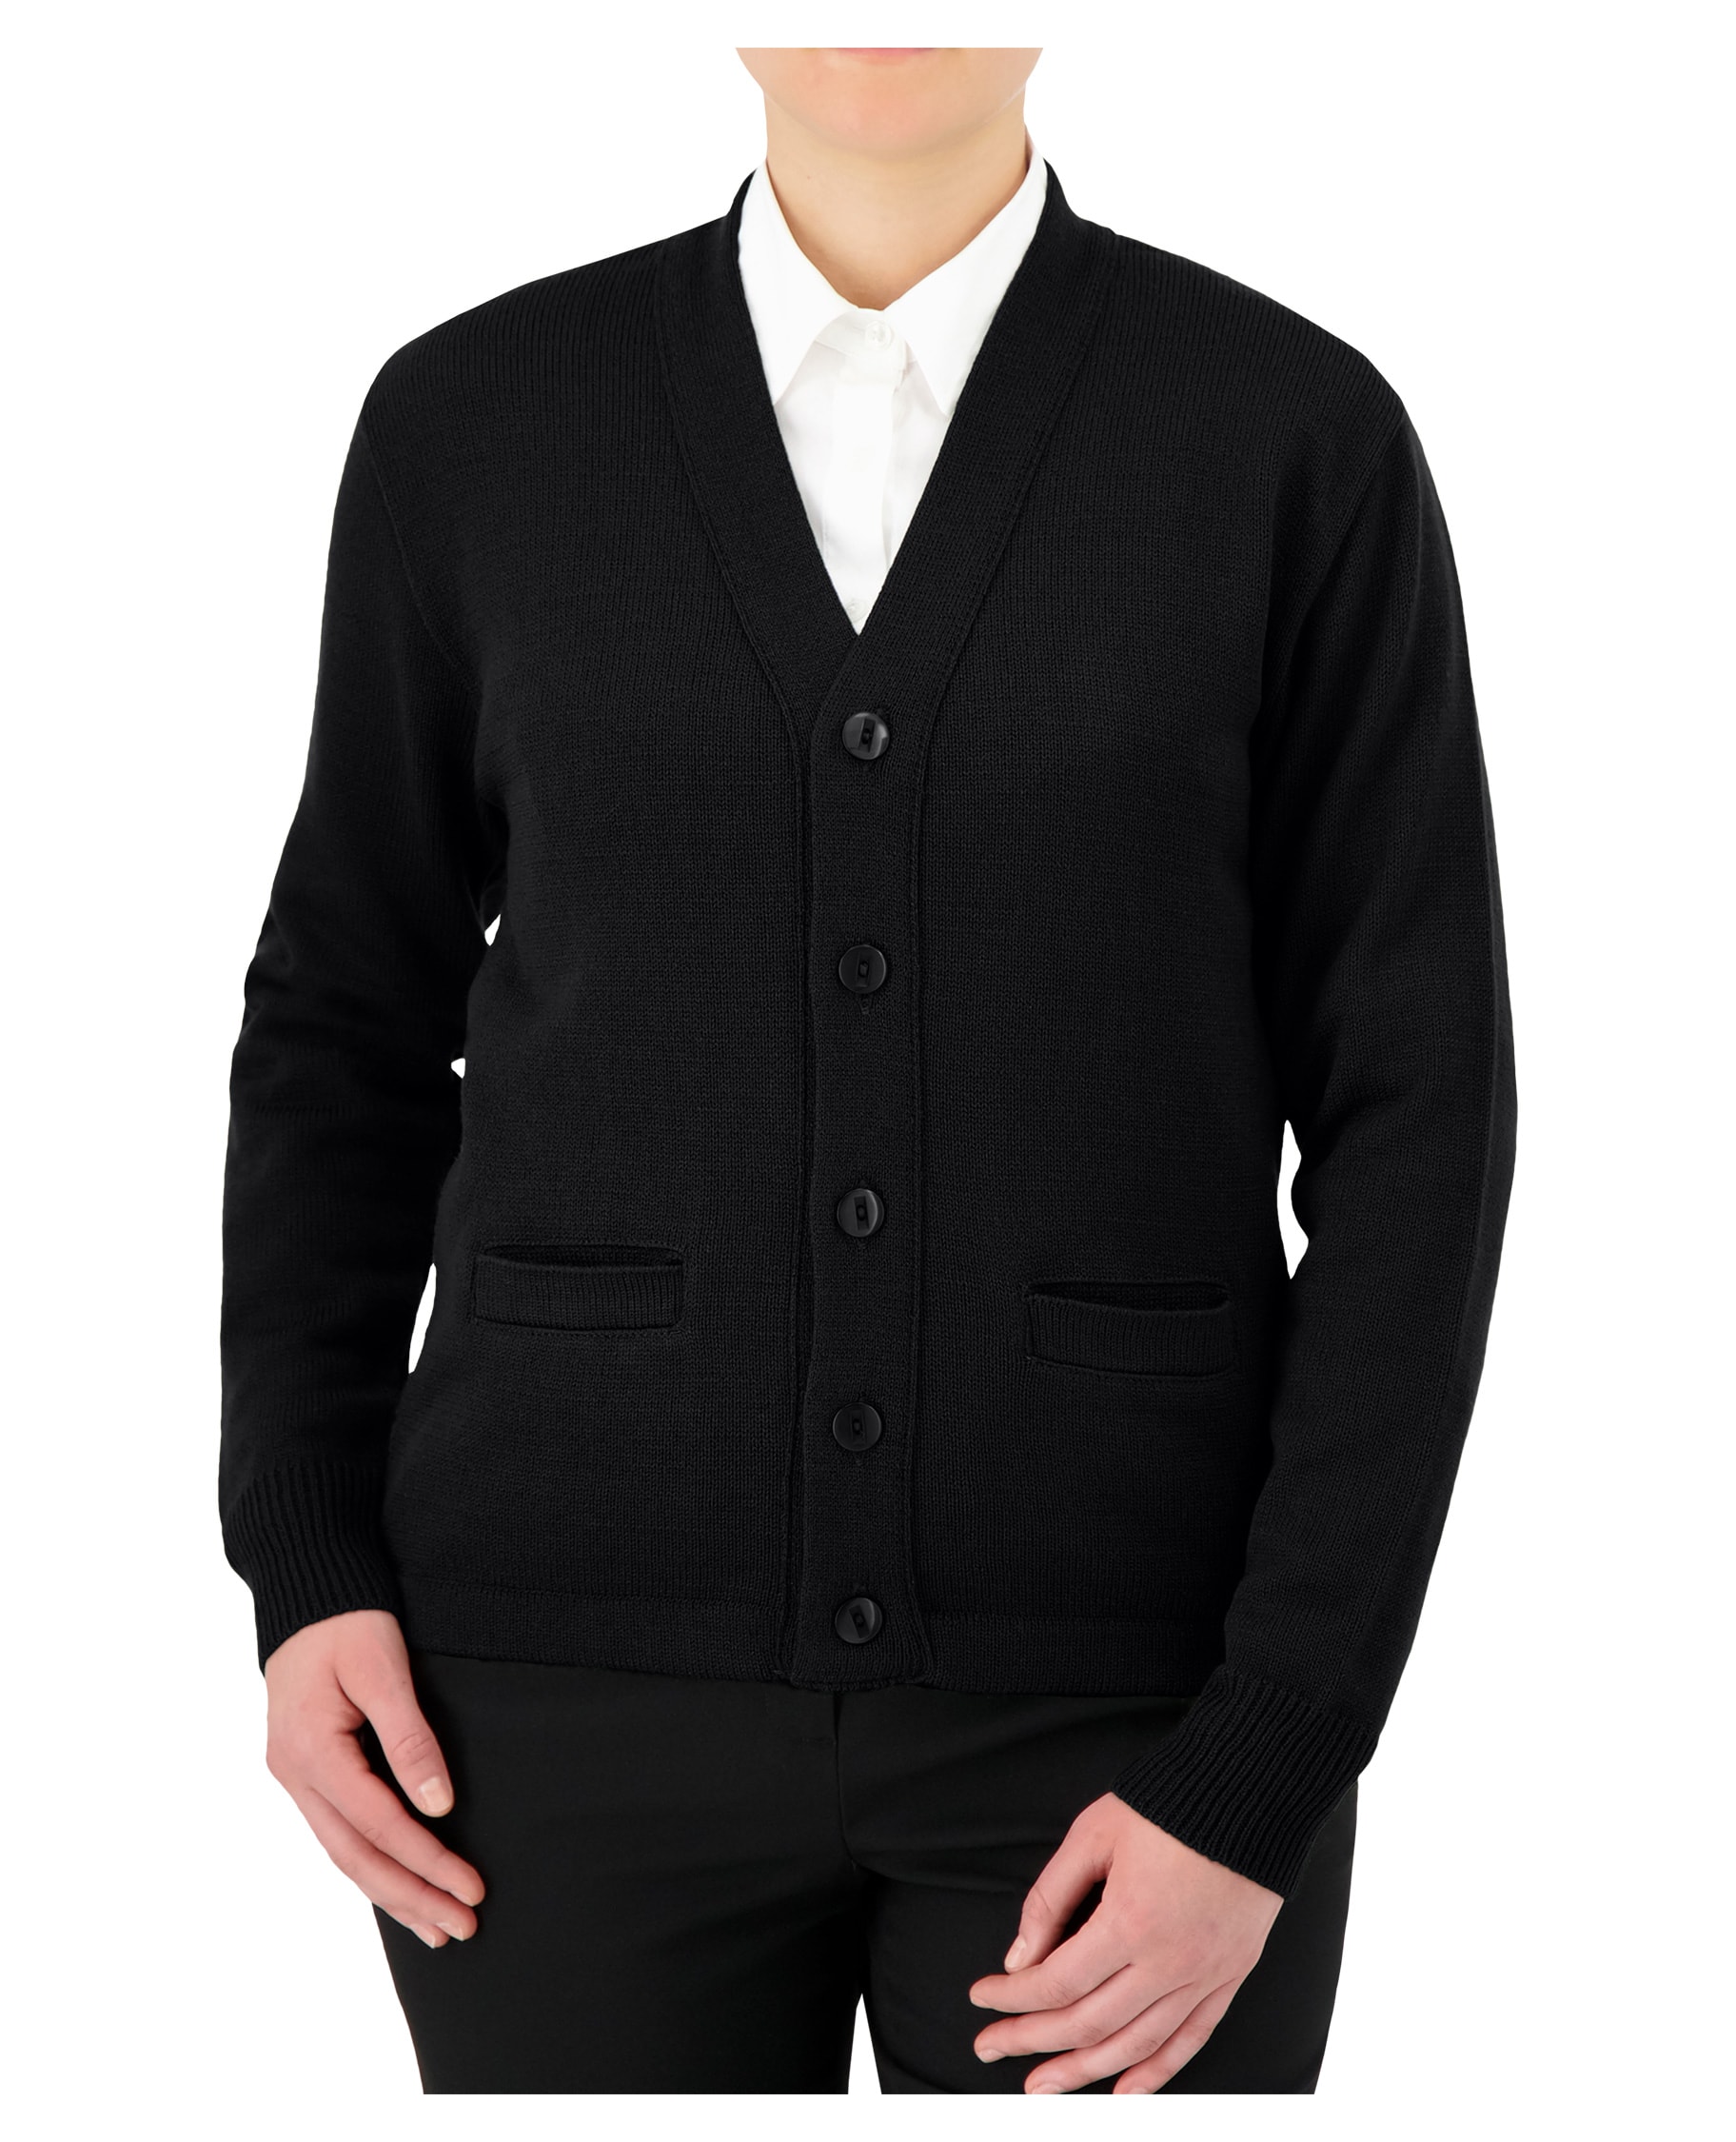 black v-neck button down cardigan with buttons